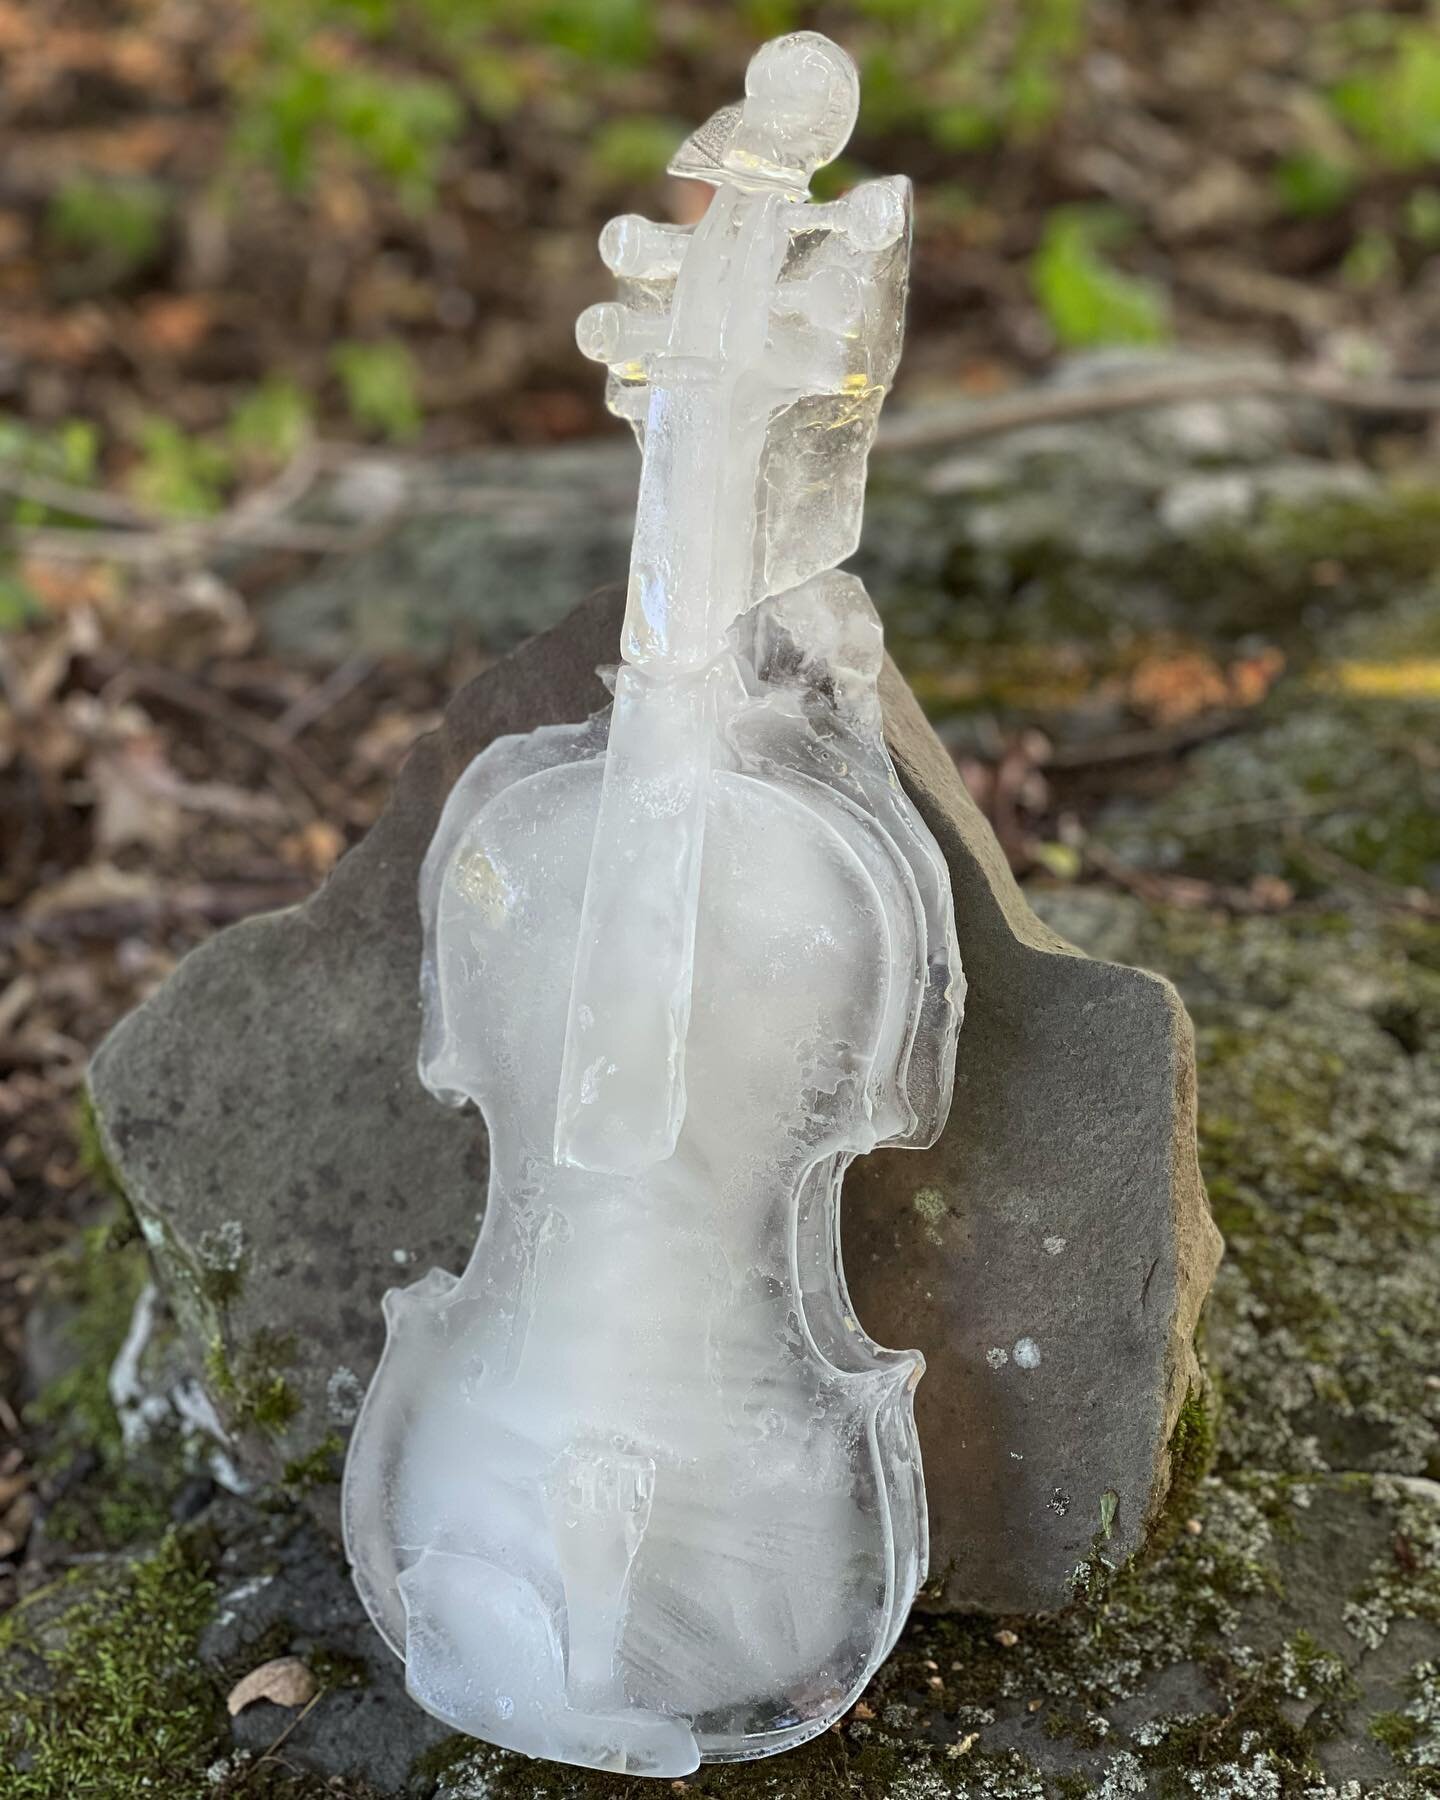 Melting Time Piece #6 (Violin) 2022  A durational sculpture made of frozen water from @rosekill.art.farm pond presented at @anaesthetics_rosekill #durationalsculpture #durationalperformance #performanceart #upstateny #upstateart #upstateartists #outd